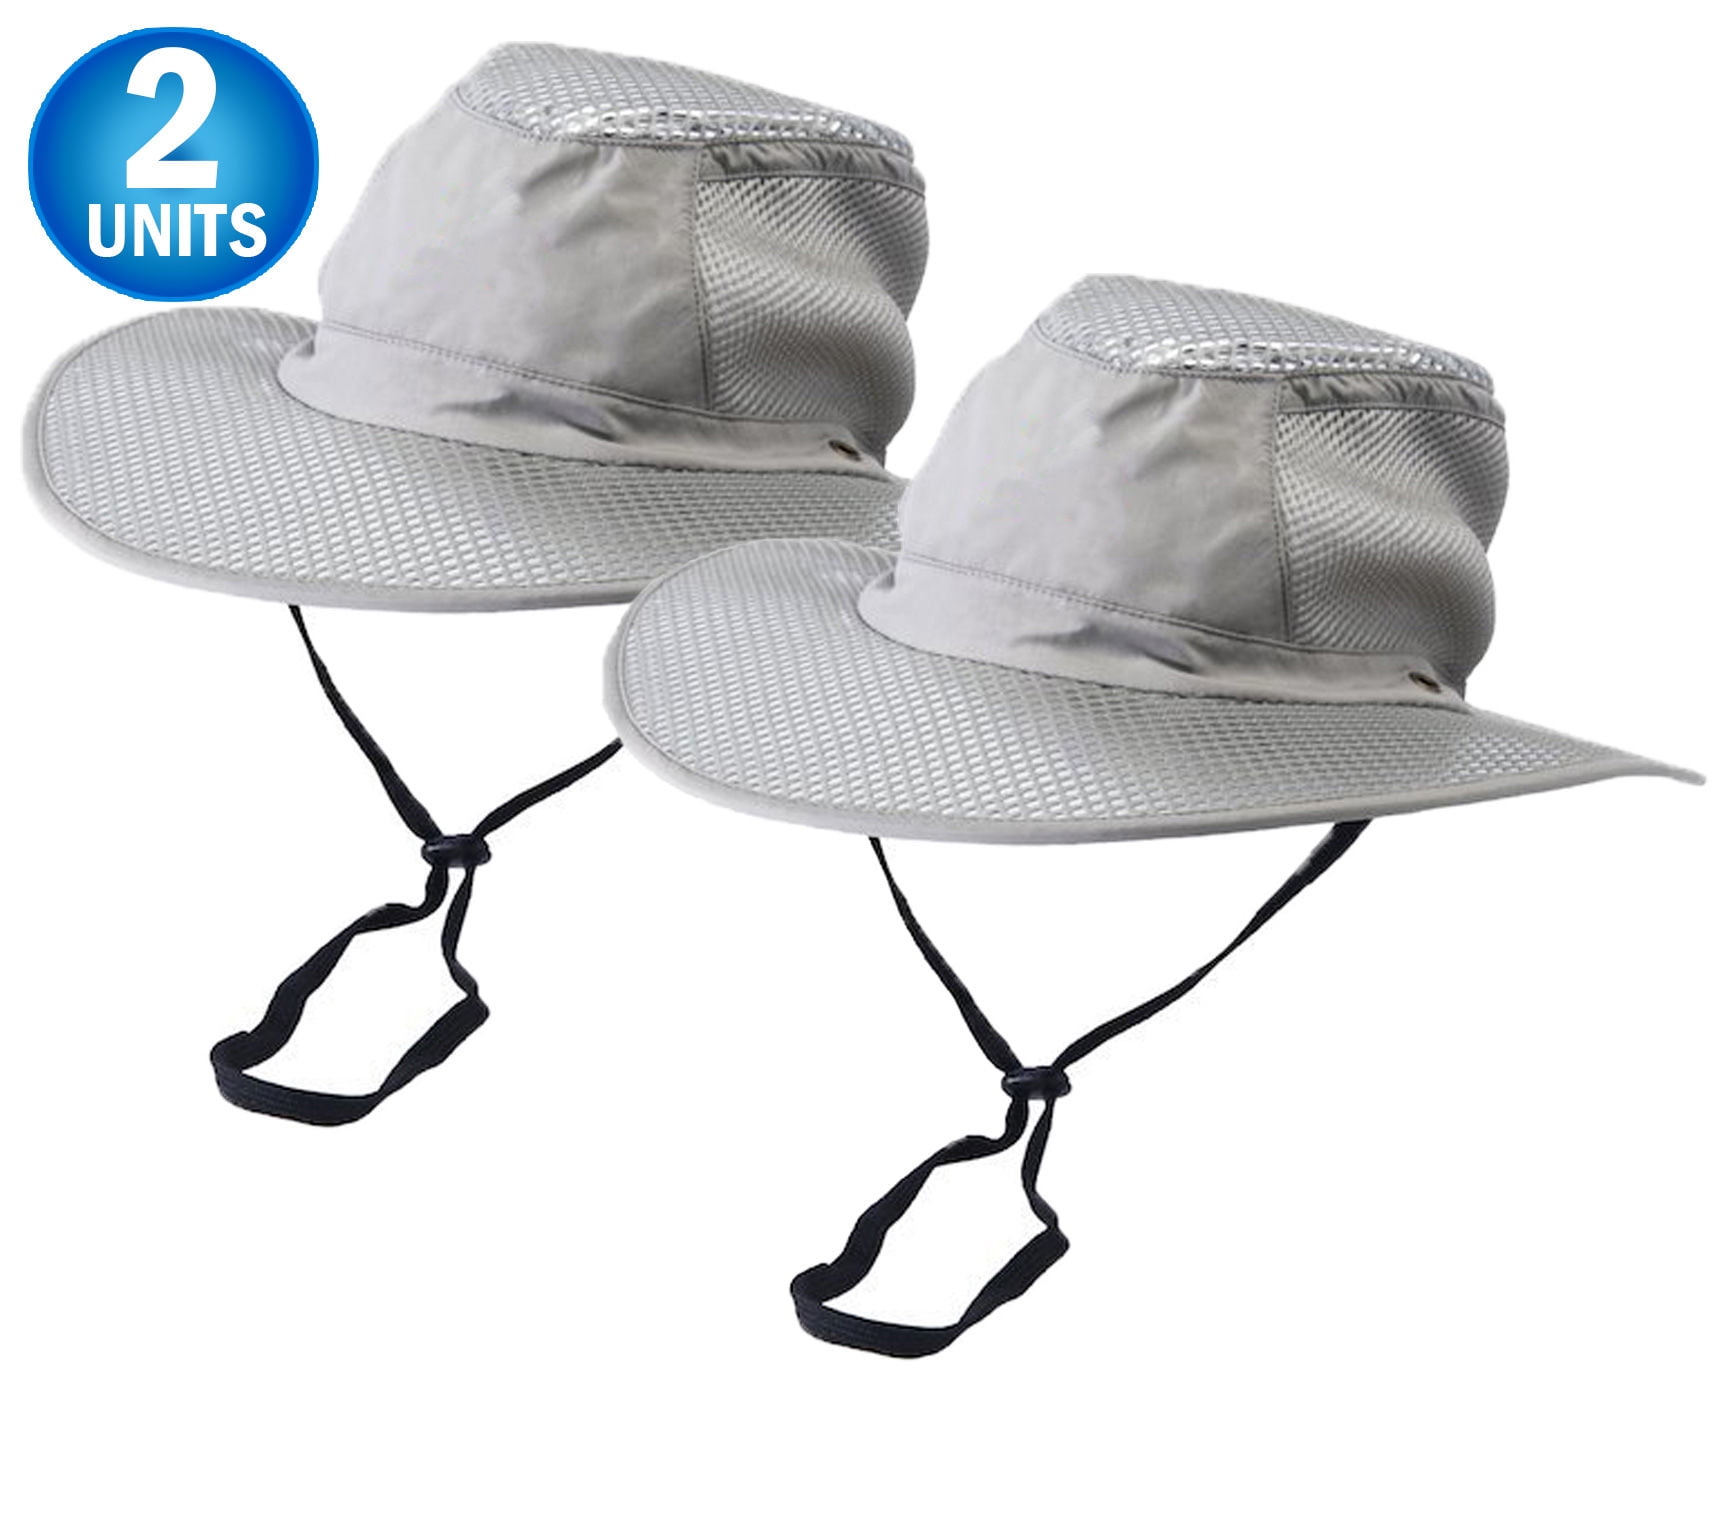 Evaporative Cooling Bucket Hat Hydro w/ UV Protection Cooler Arctic Caps Outdoor